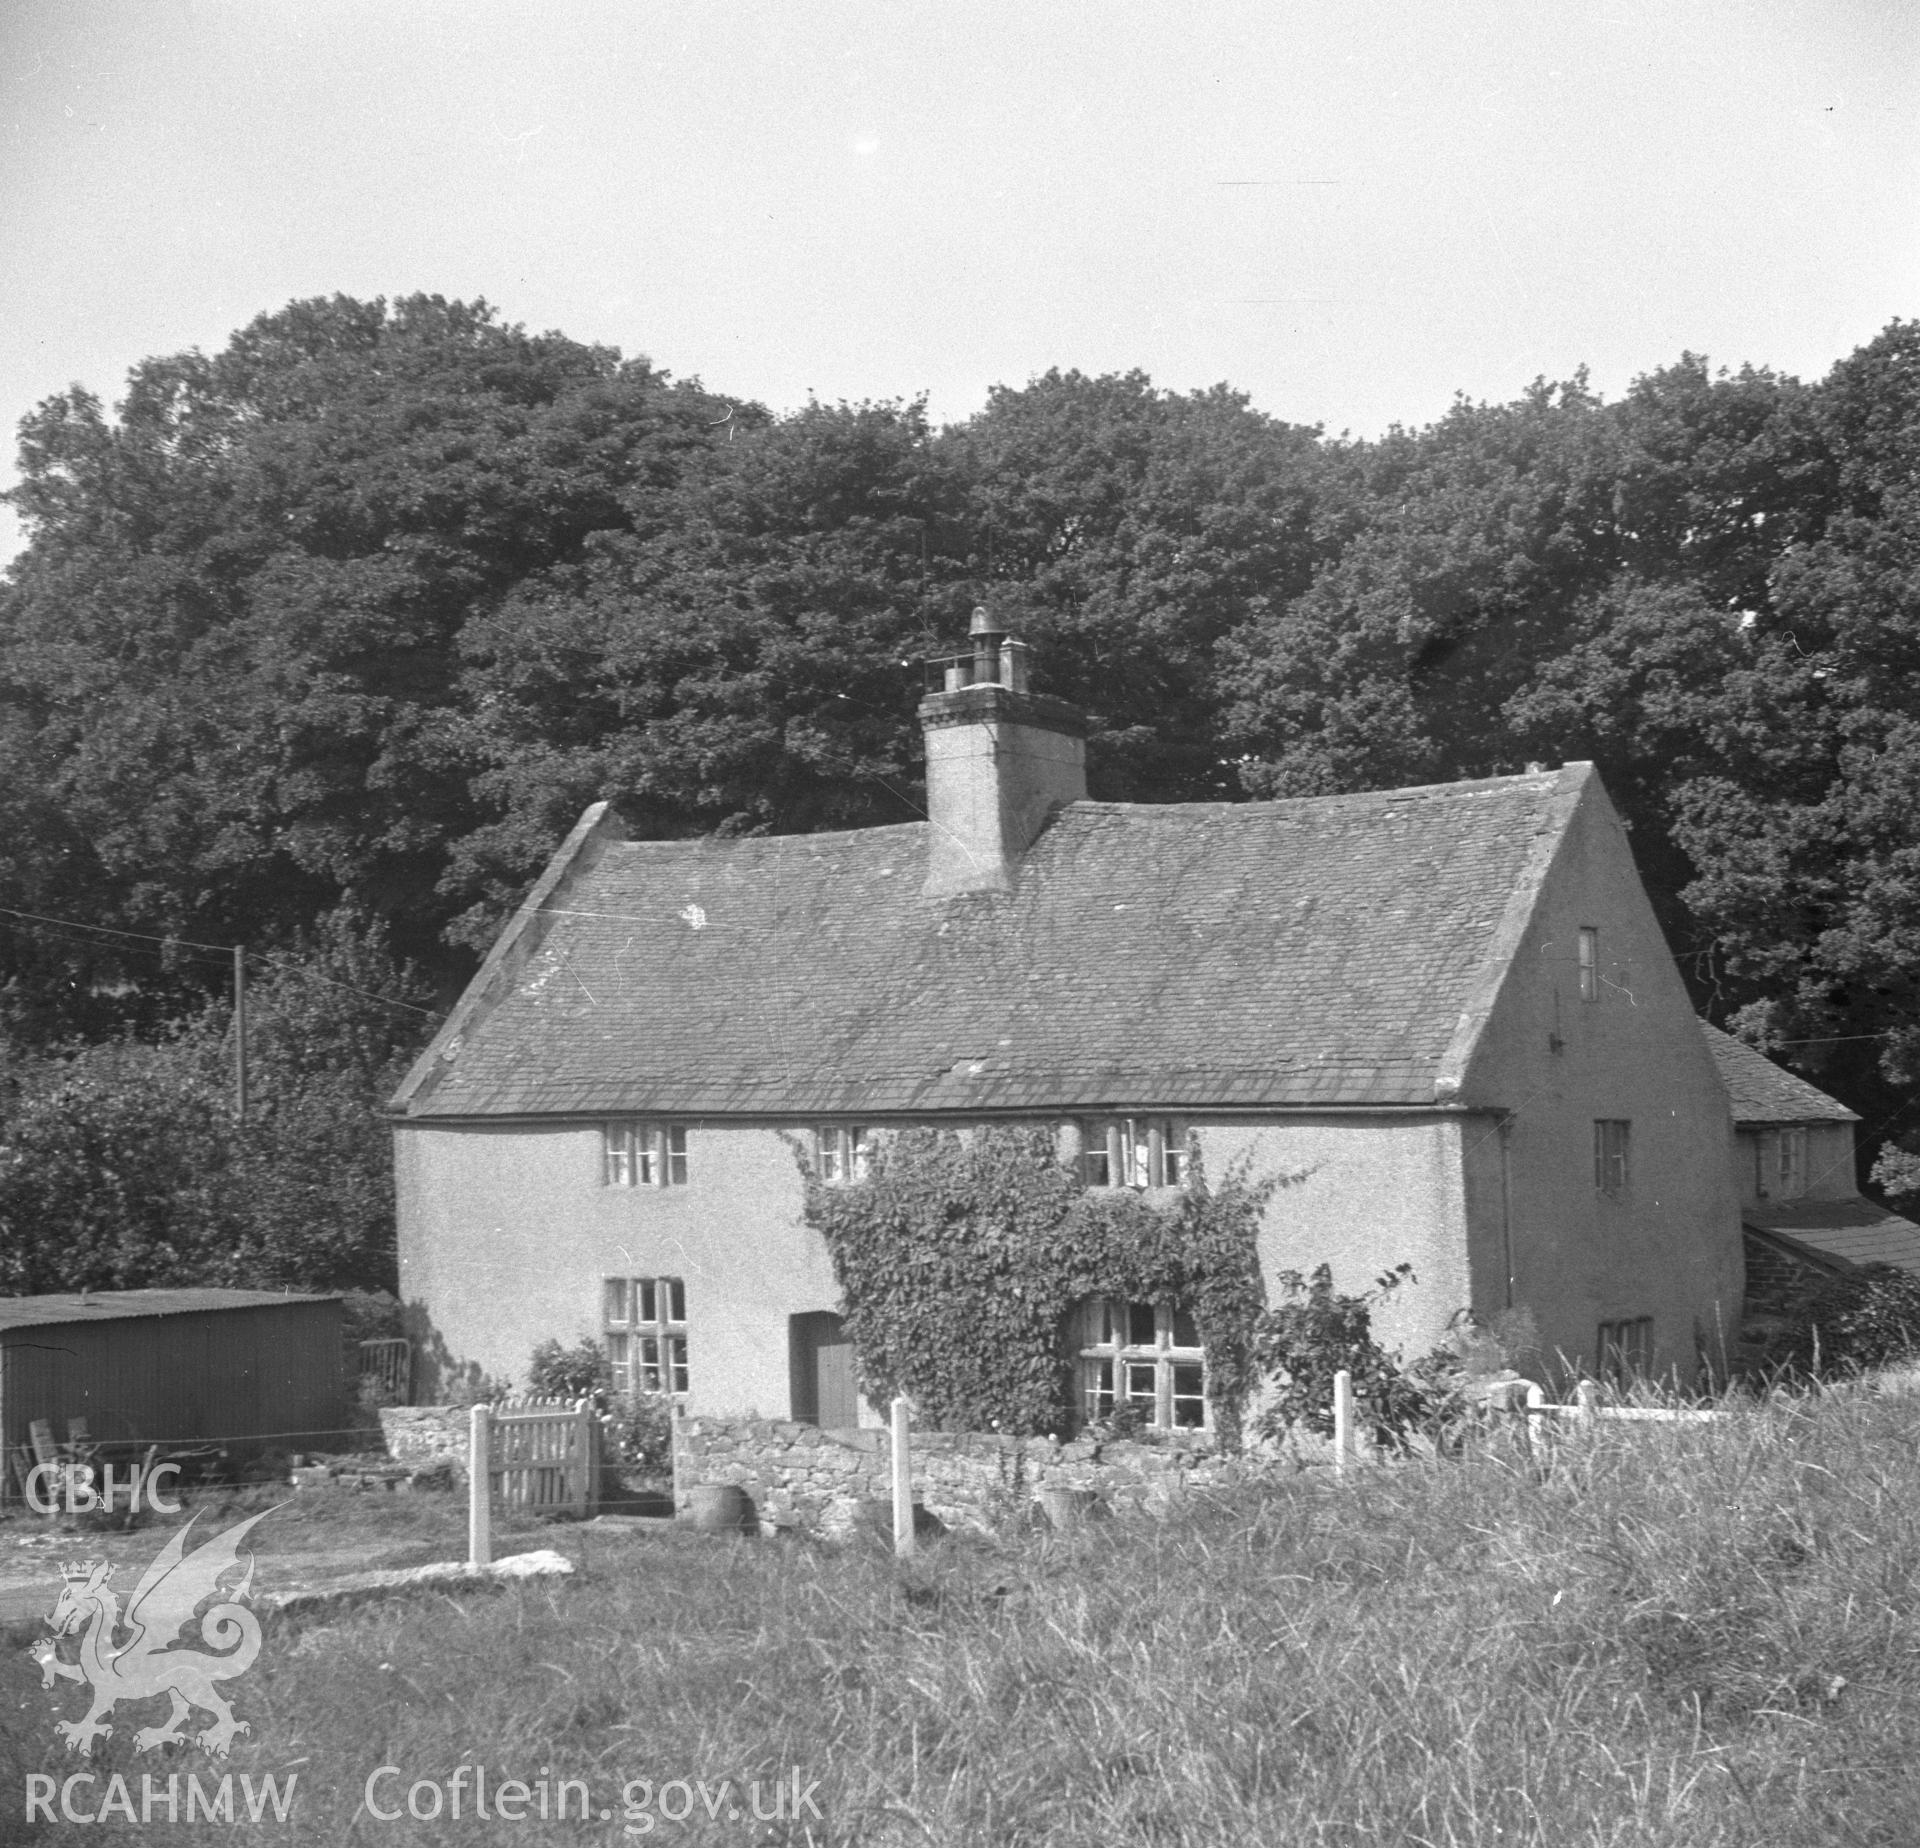 Digital copy of a black and white nitrate negative, exterior view of front elevation of Coed-y-Cra Uchaf.